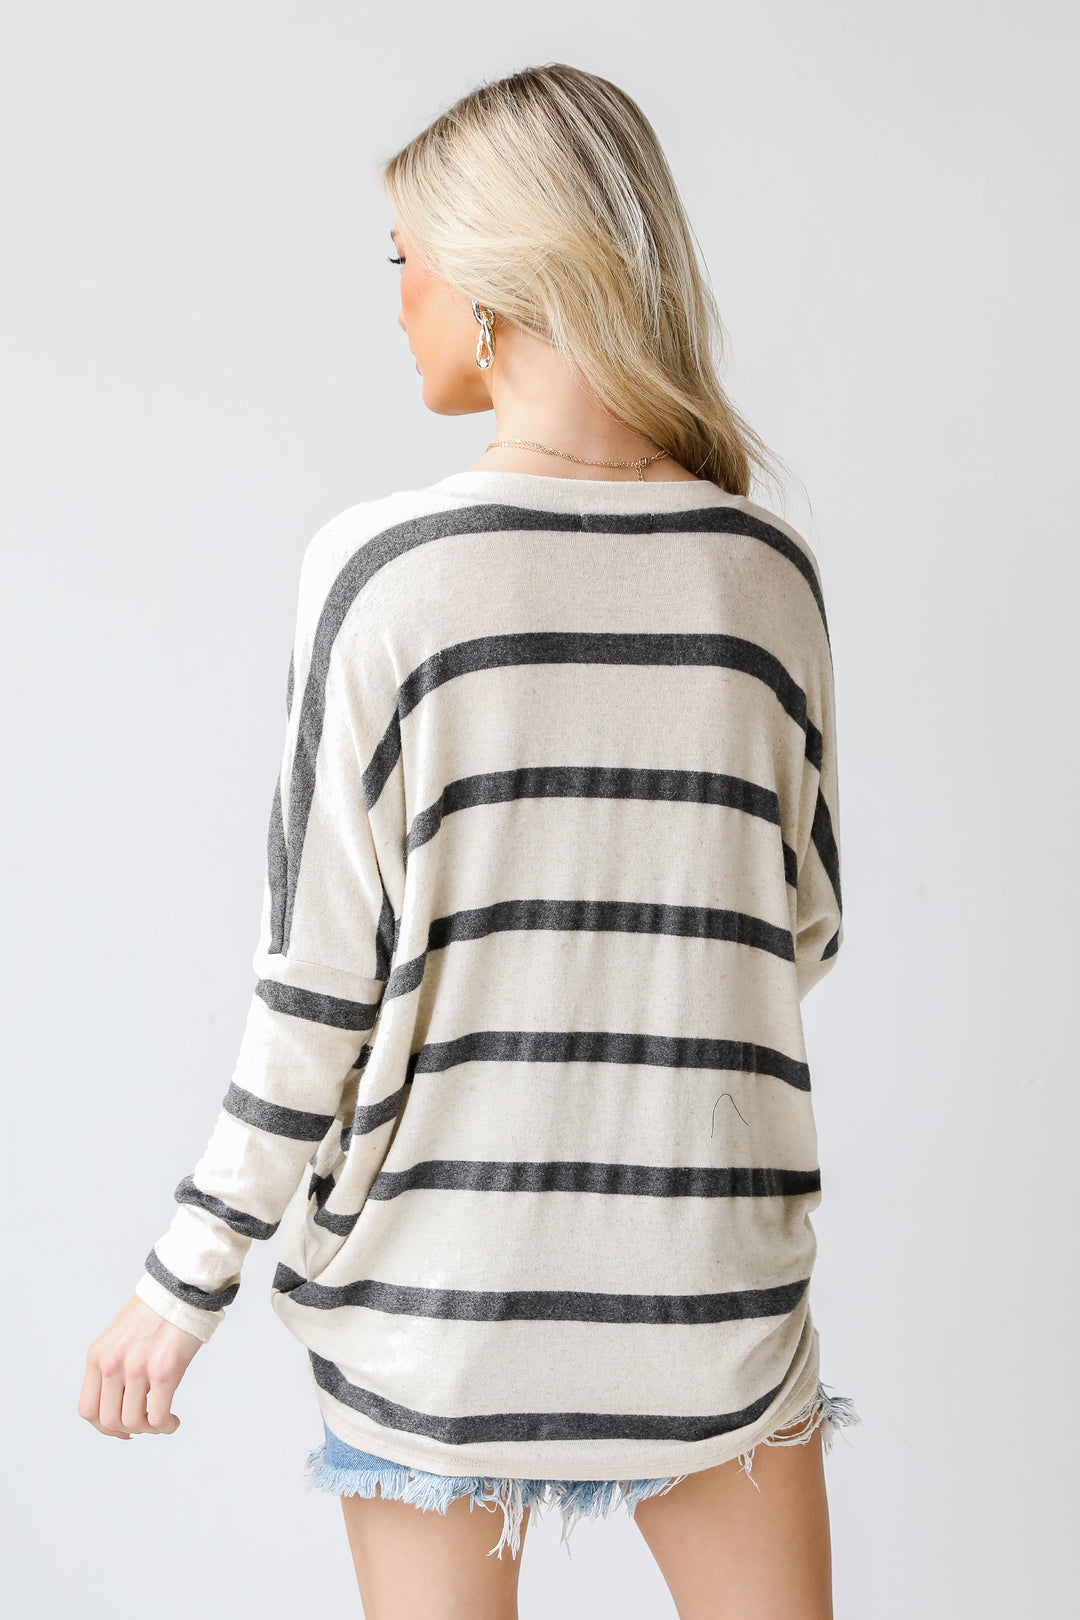 Oversized Striped Top in charcoal back view